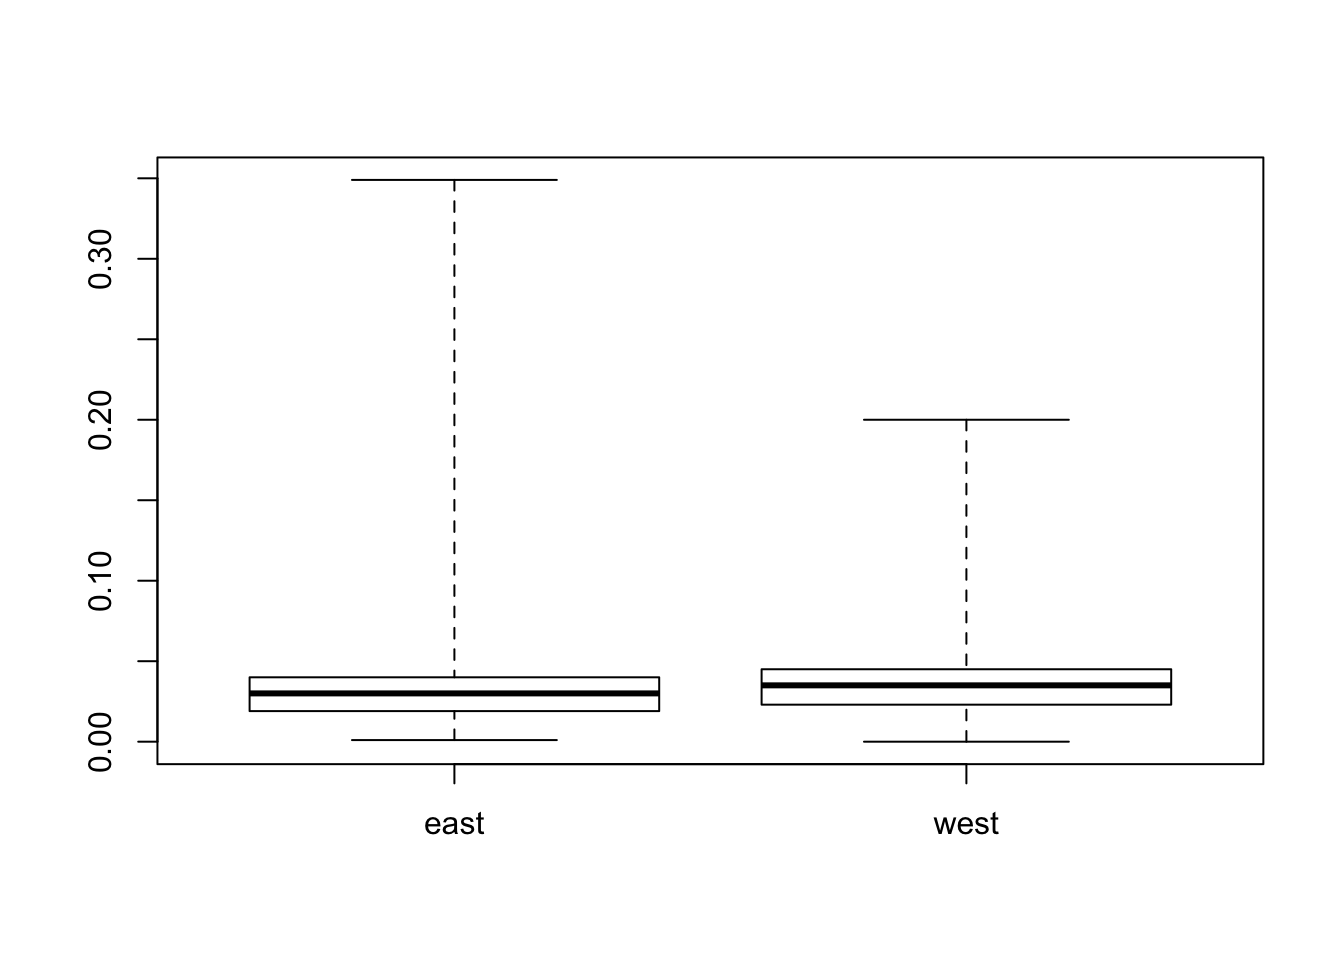 Boxplot of Ozone for East and West Regions